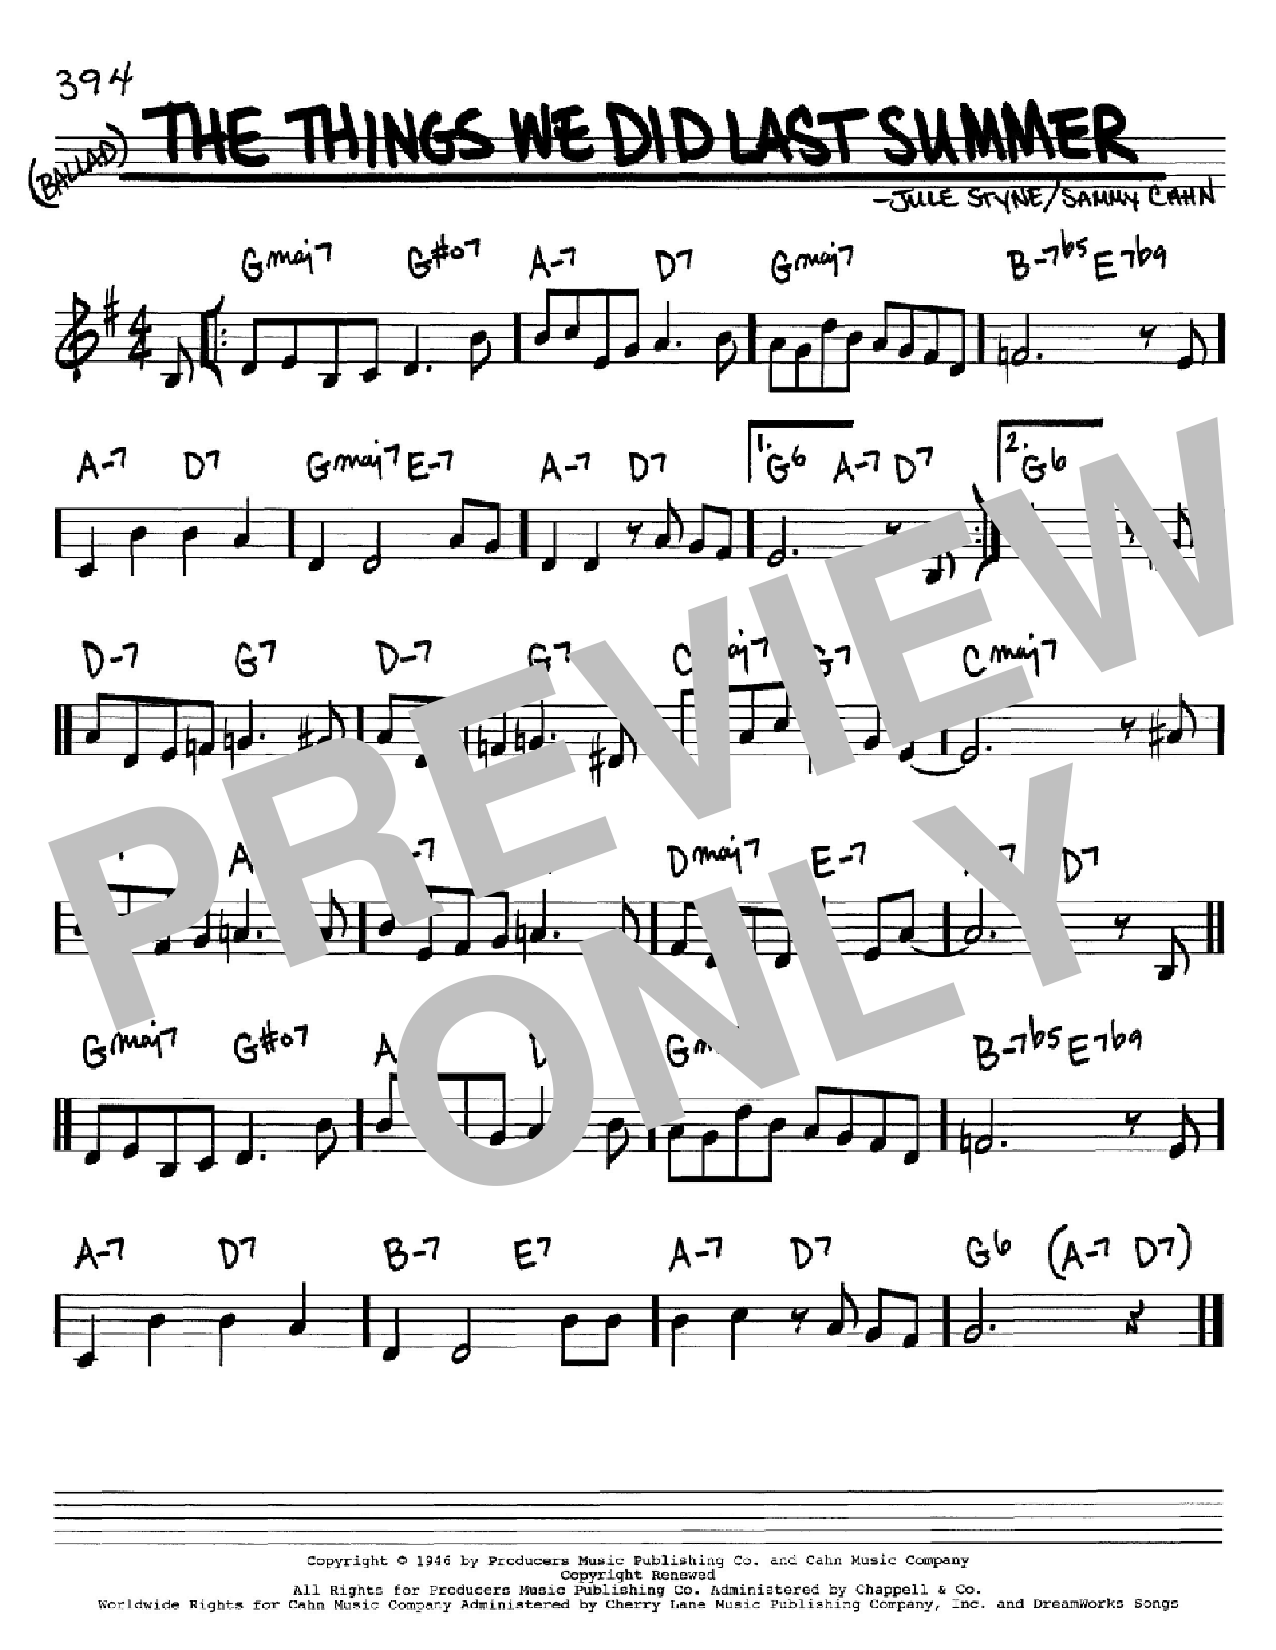 Download Sammy Cahn The Things We Did Last Summer Sheet Music